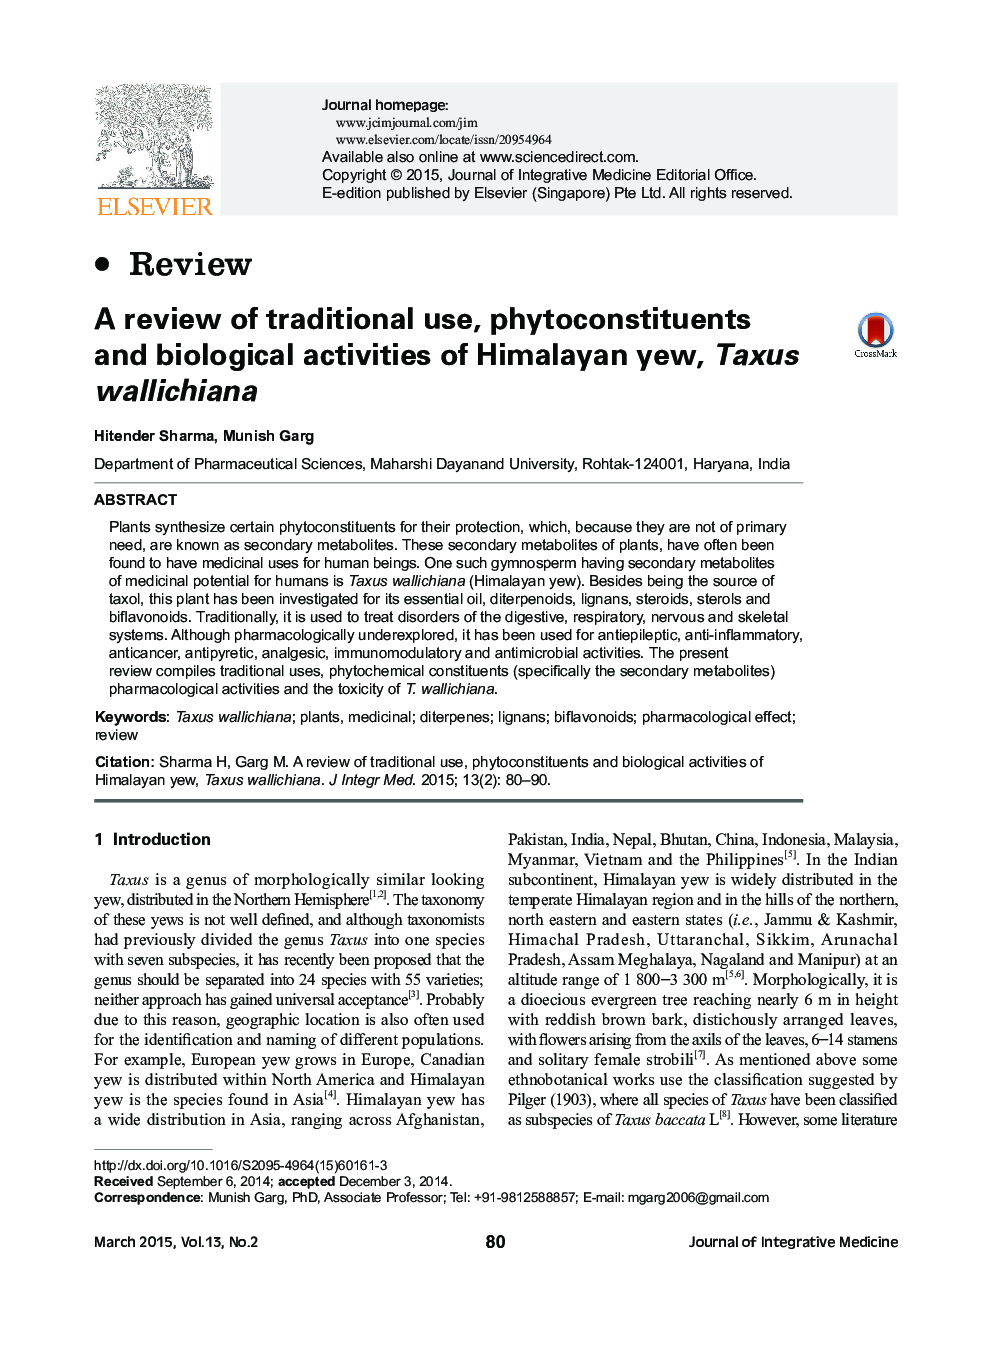 A review of traditional use, phytoconstituents and biological activities of Himalayan yew, Taxus wallichiana